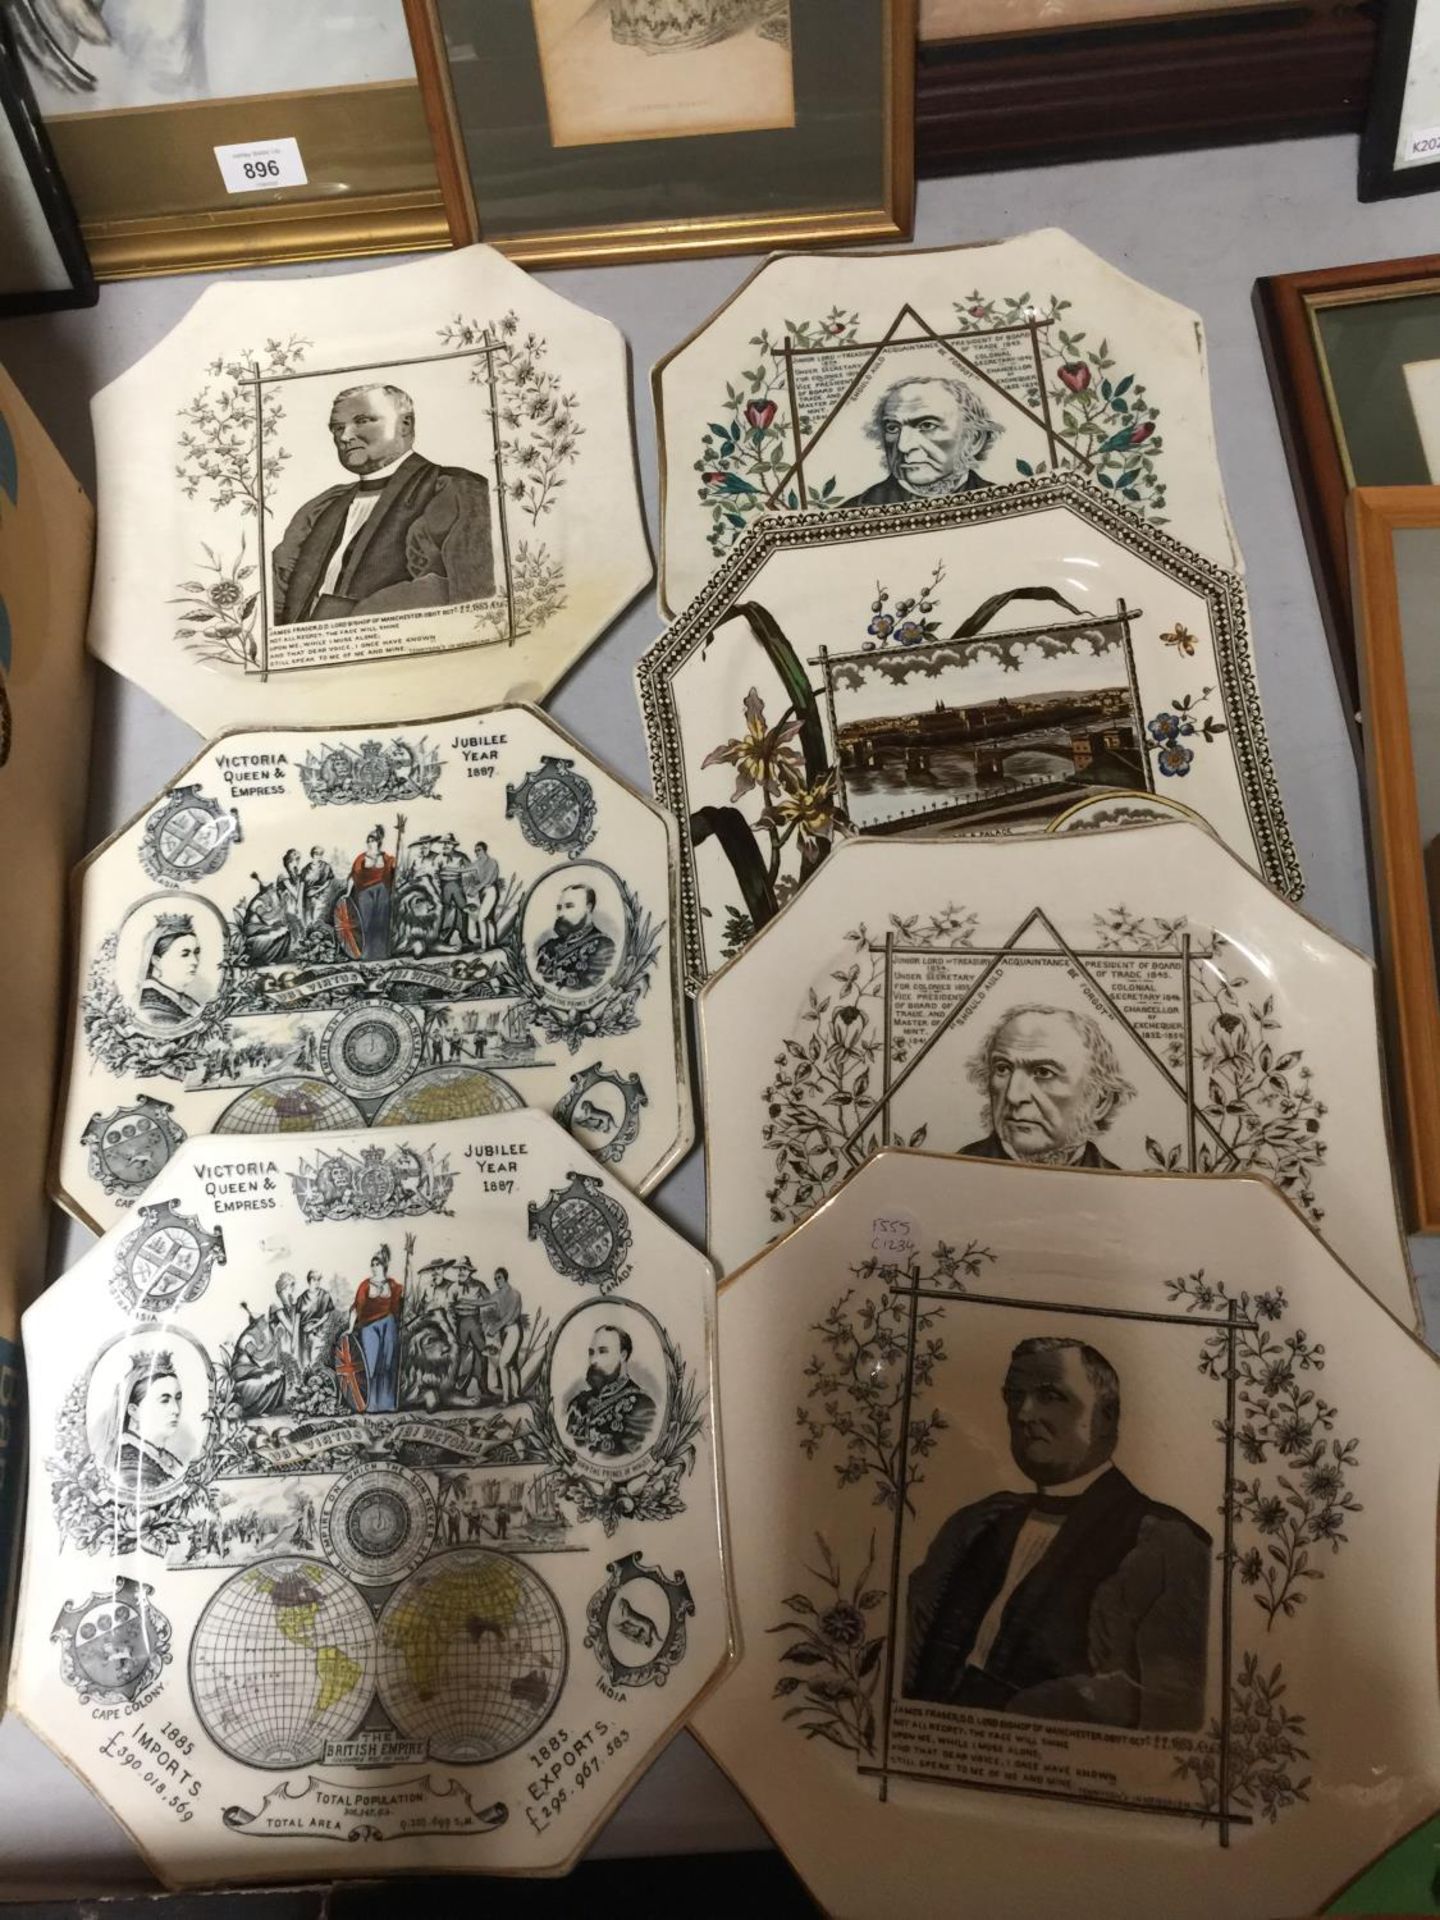 SEVEN OCTAGONAL VINTAGE CABINET PLATES WITH IMAGES OF QUEEN VICTORIA JUBILEE YEAR 1887, JAMES